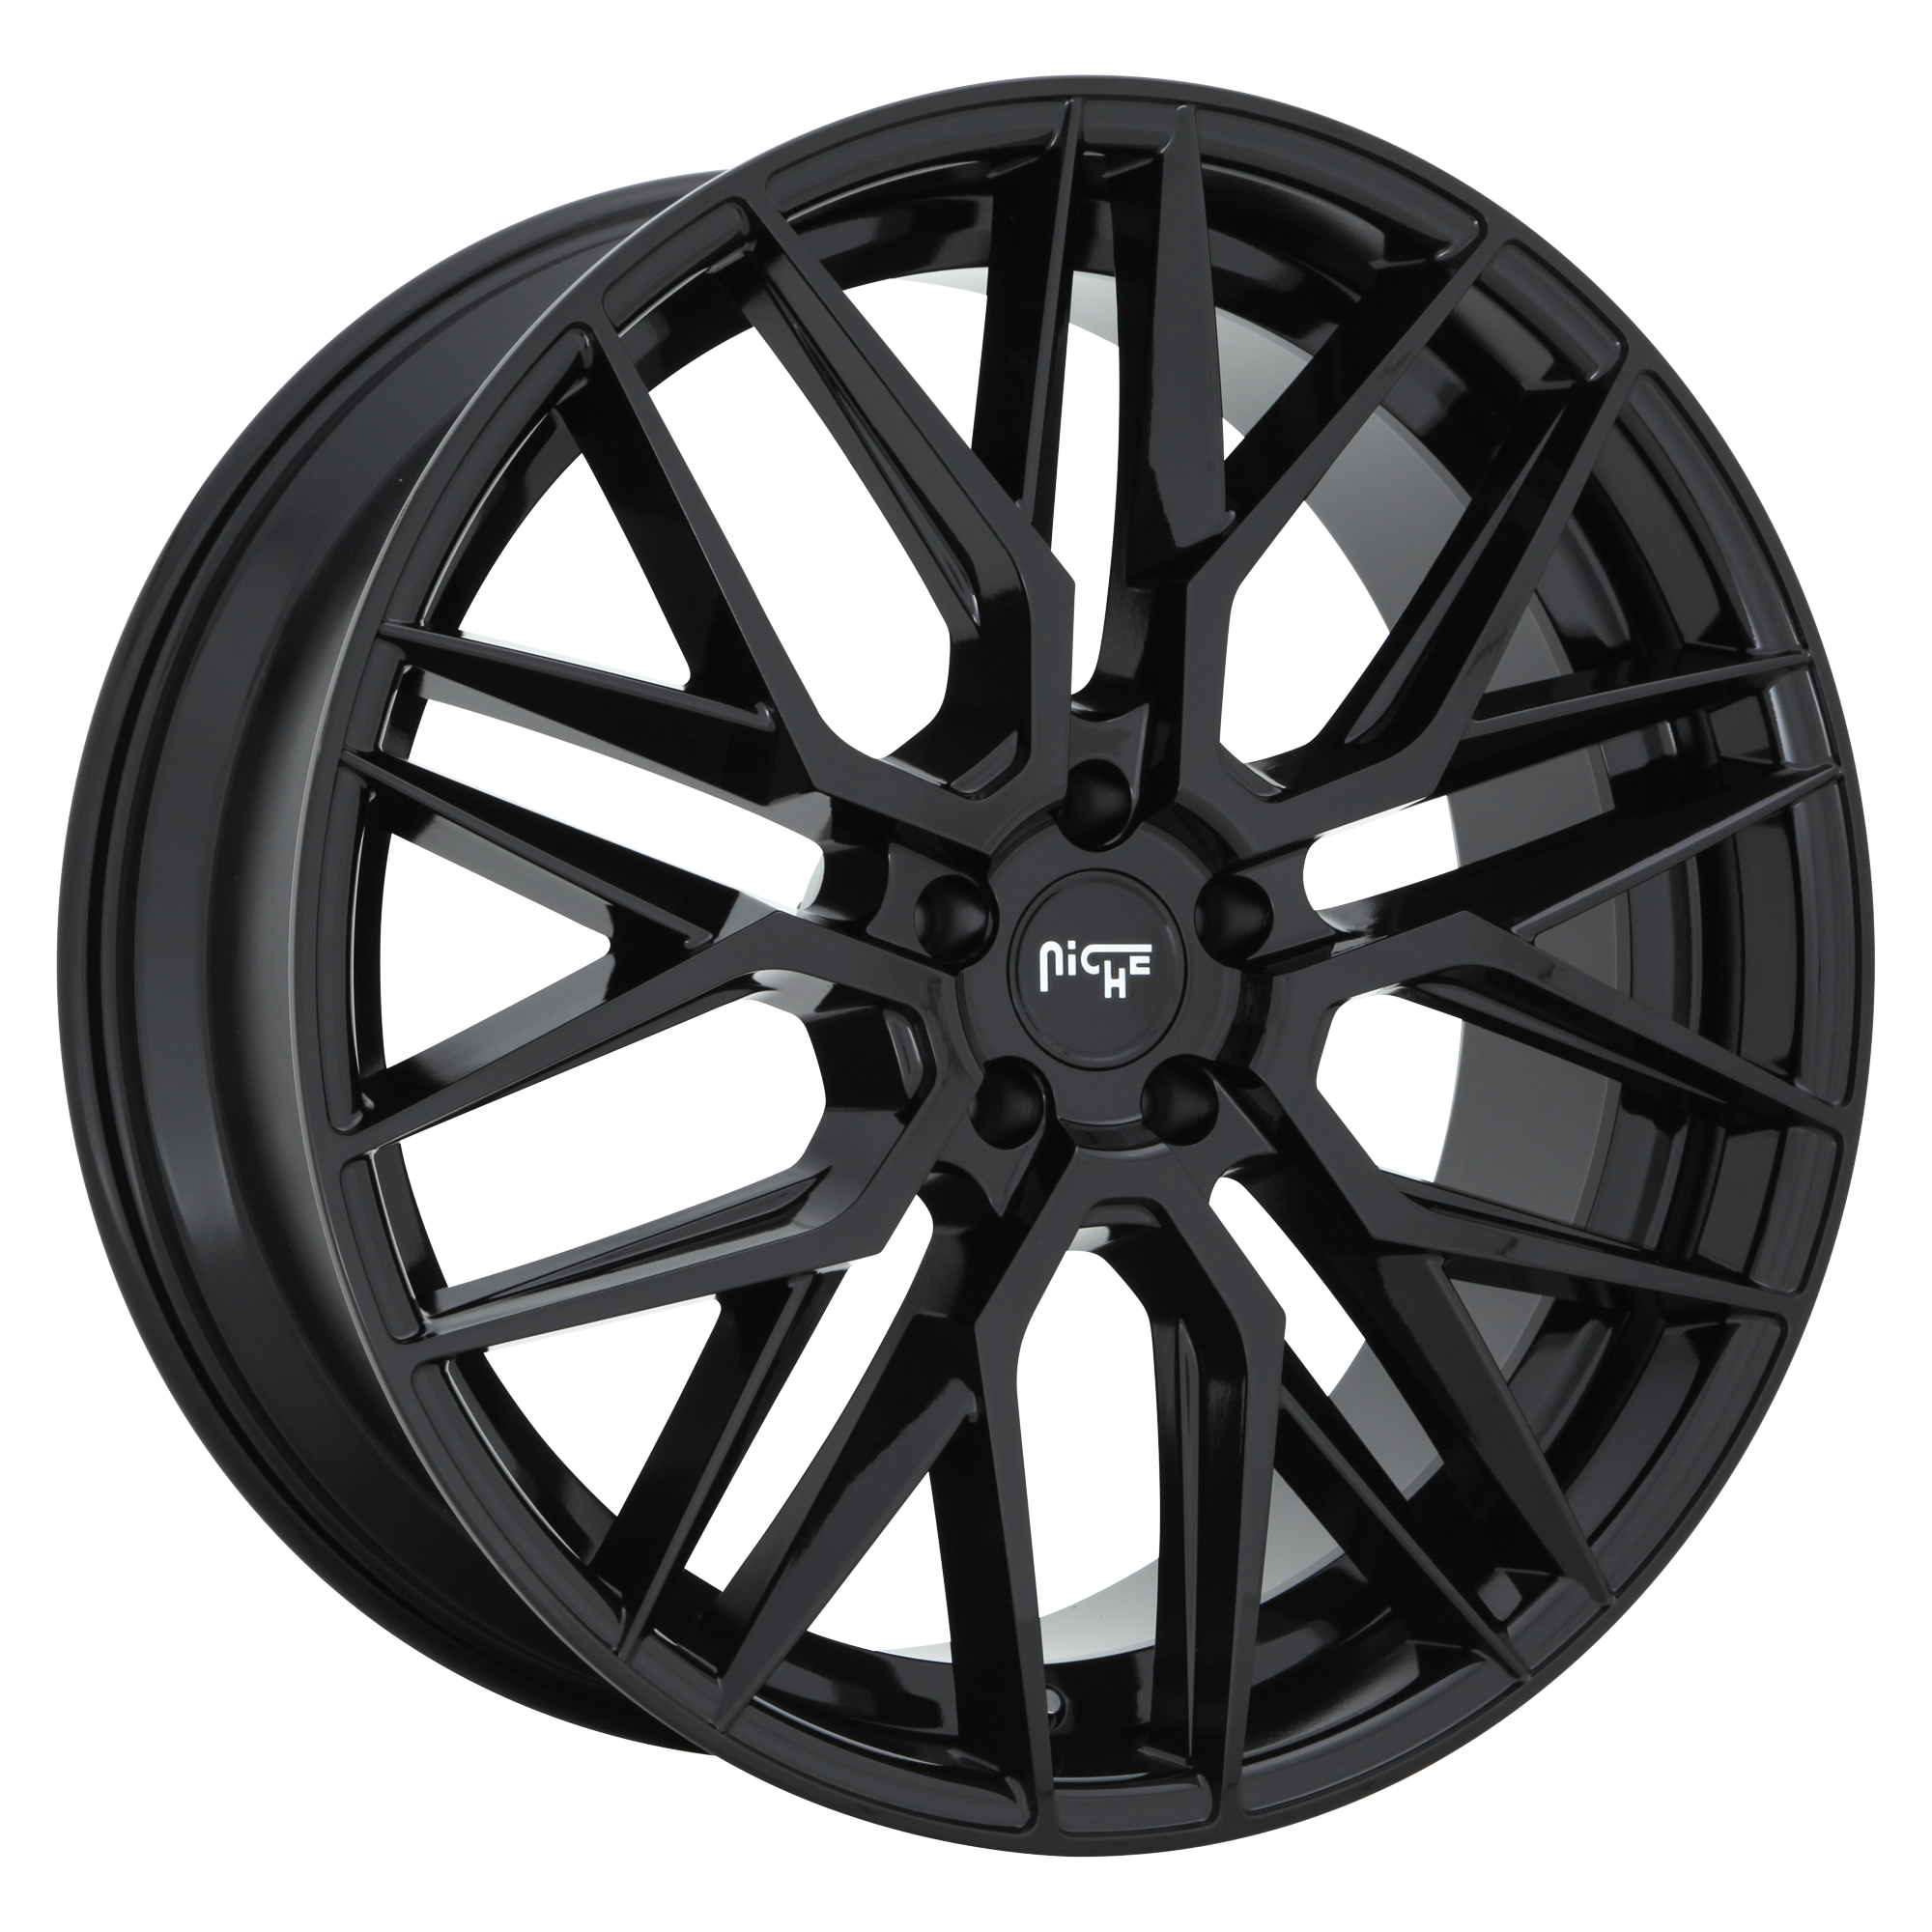 GAMMA 22x9 5x112.00 GLOSS BLACK (38 mm) - Tires and Engine Performance